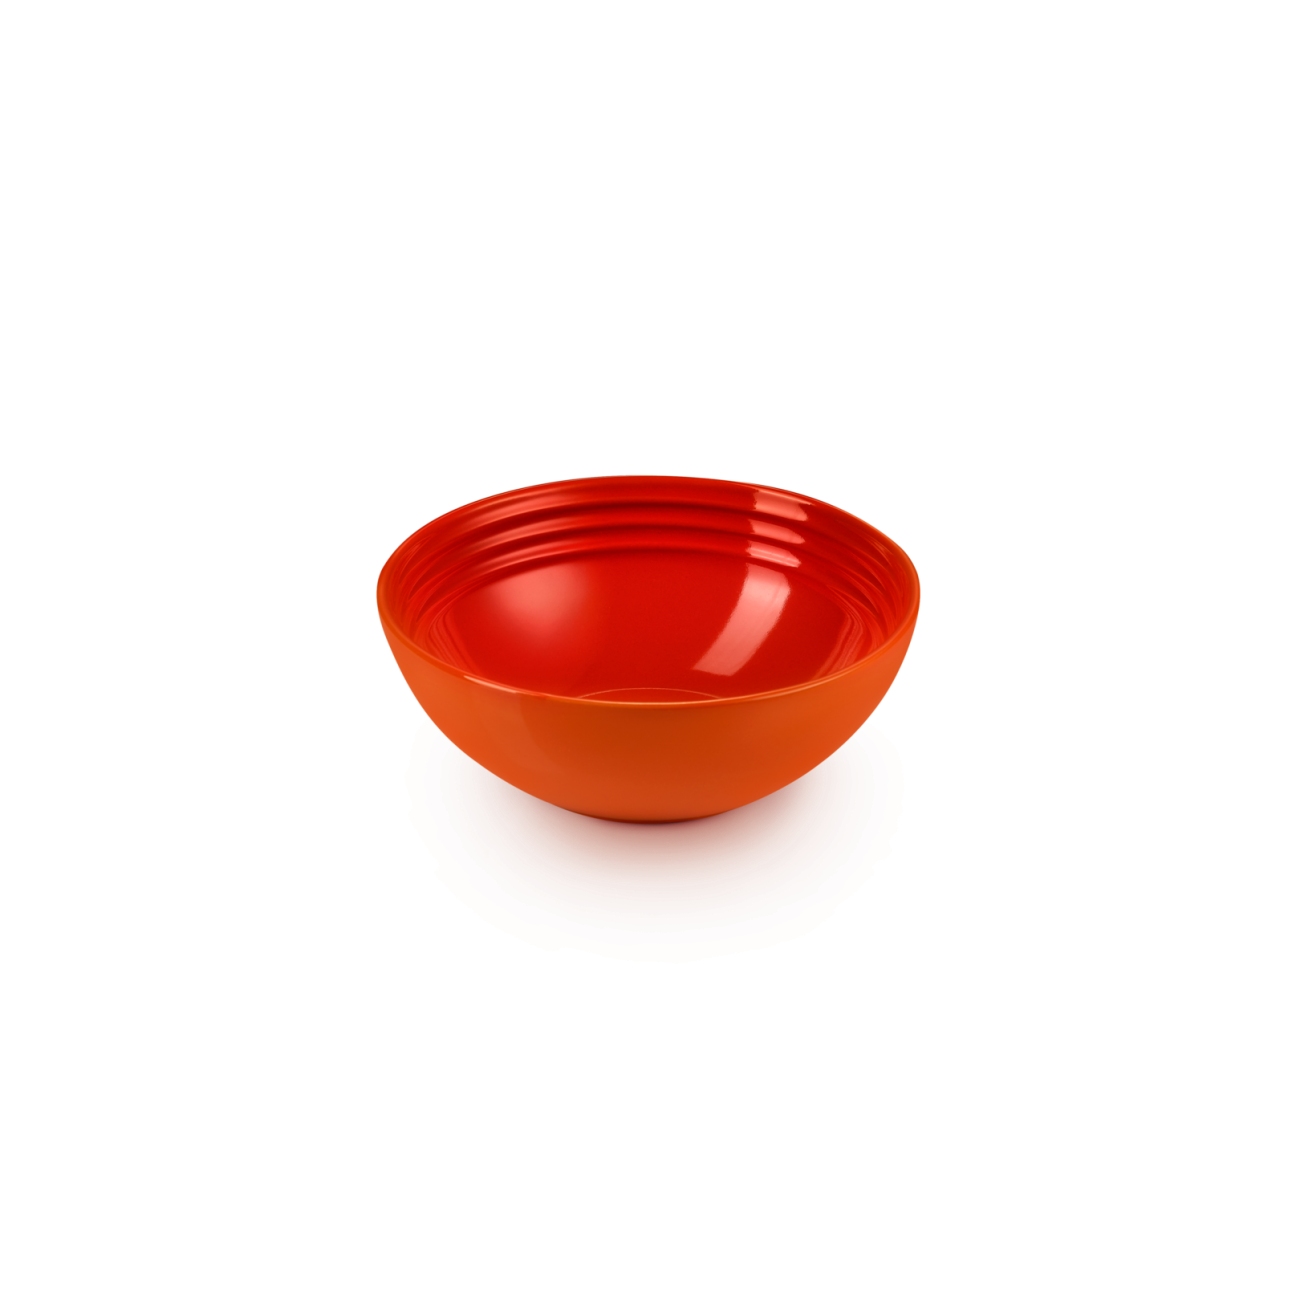 Le Creuset Cereal Bowl Vancouver